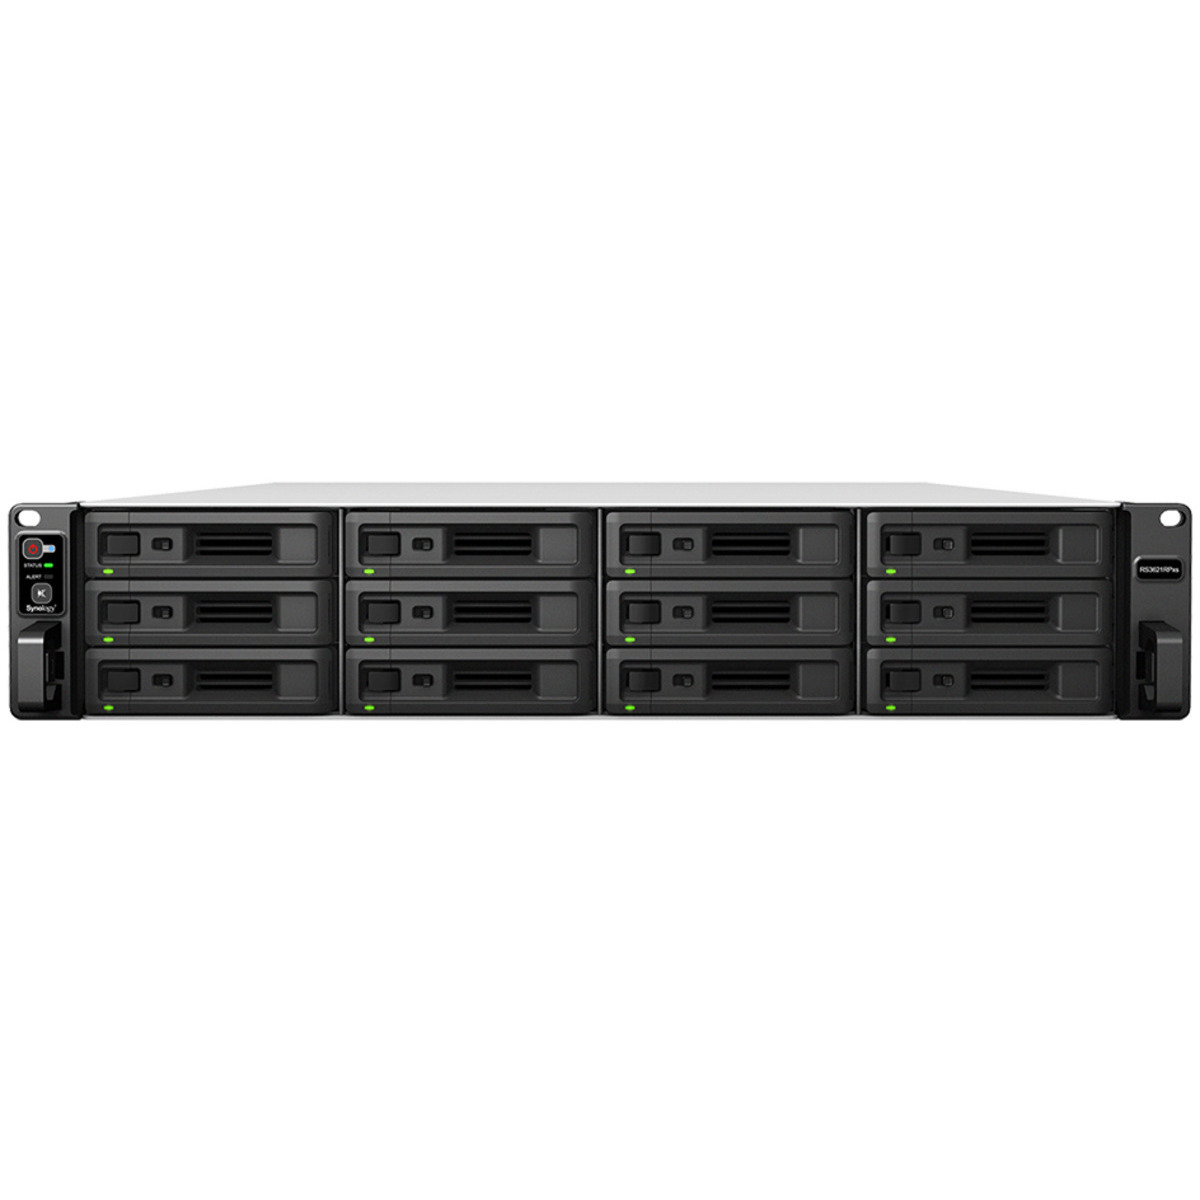 Synology RackStation RS3621RPxs 64tb 12-Bay RackMount Large Business / Enterprise NAS - Network Attached Storage Device 8x8tb Western Digital Red Plus WD80EFPX 3.5 7200rpm SATA 6Gb/s HDD NAS Class Drives Installed - Burn-In Tested RackStation RS3621RPxs